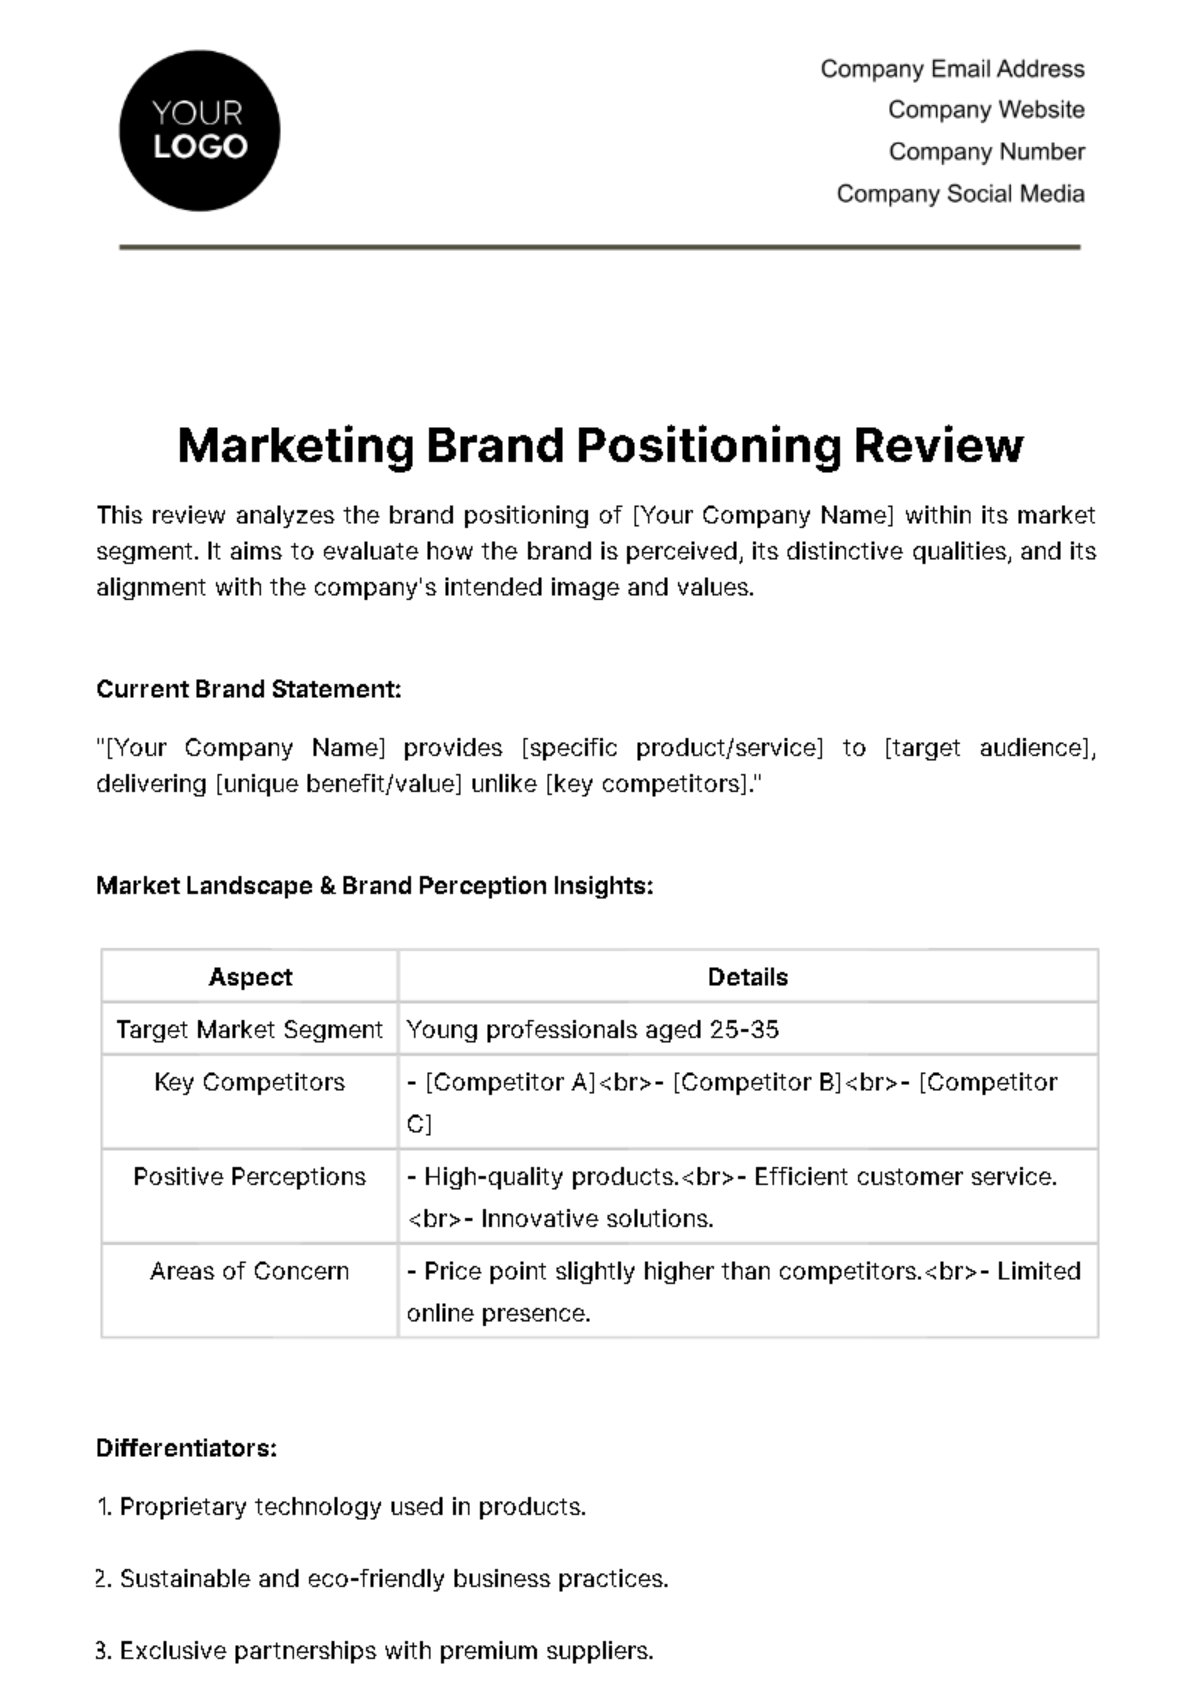 Free Marketing Brand Positioning Review Template